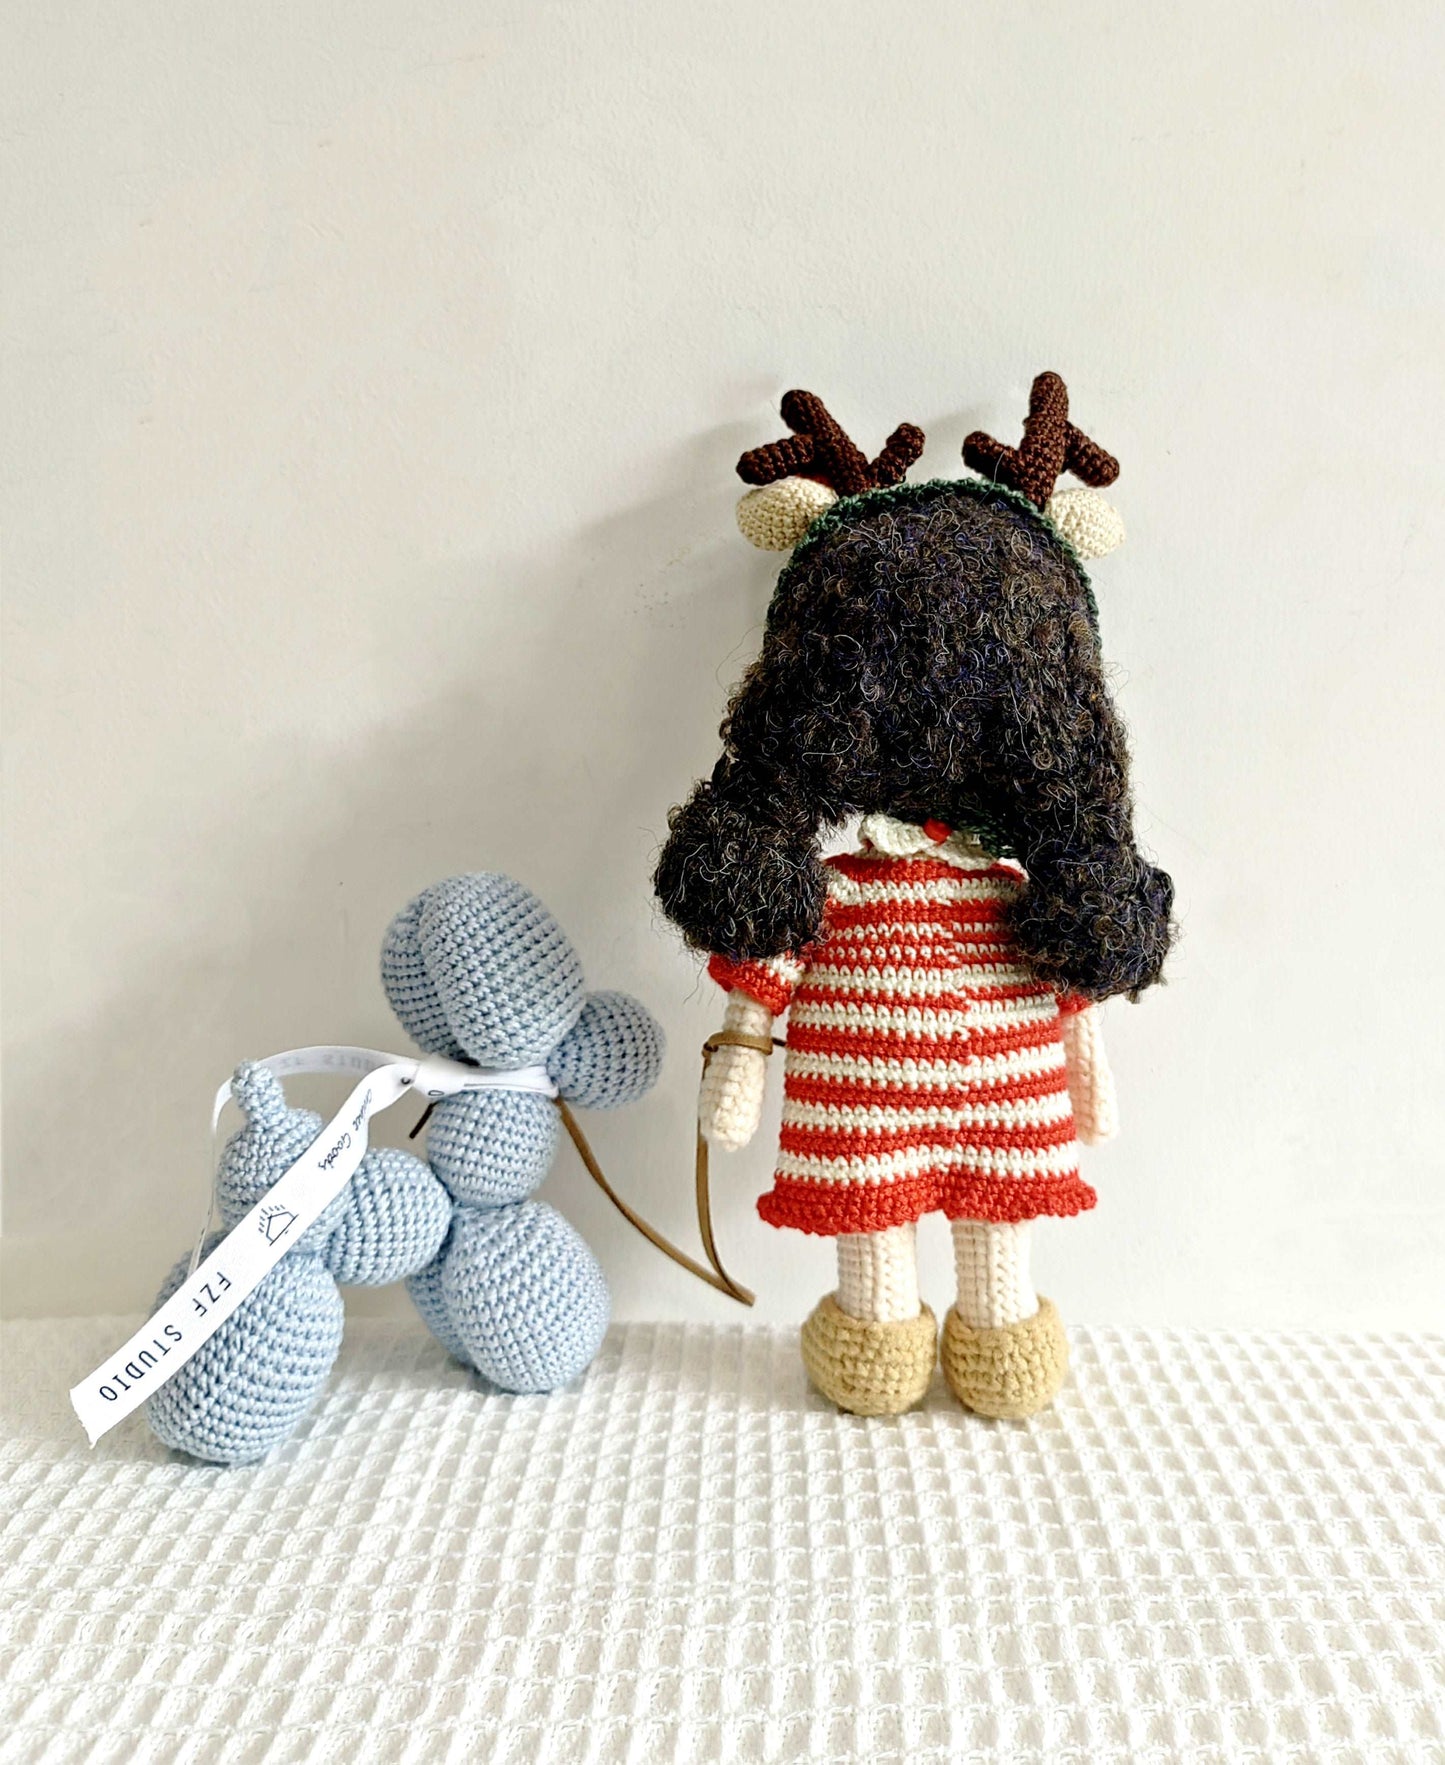 Handcrafted Crochet People Figurines for Special Occasions and Celebrations